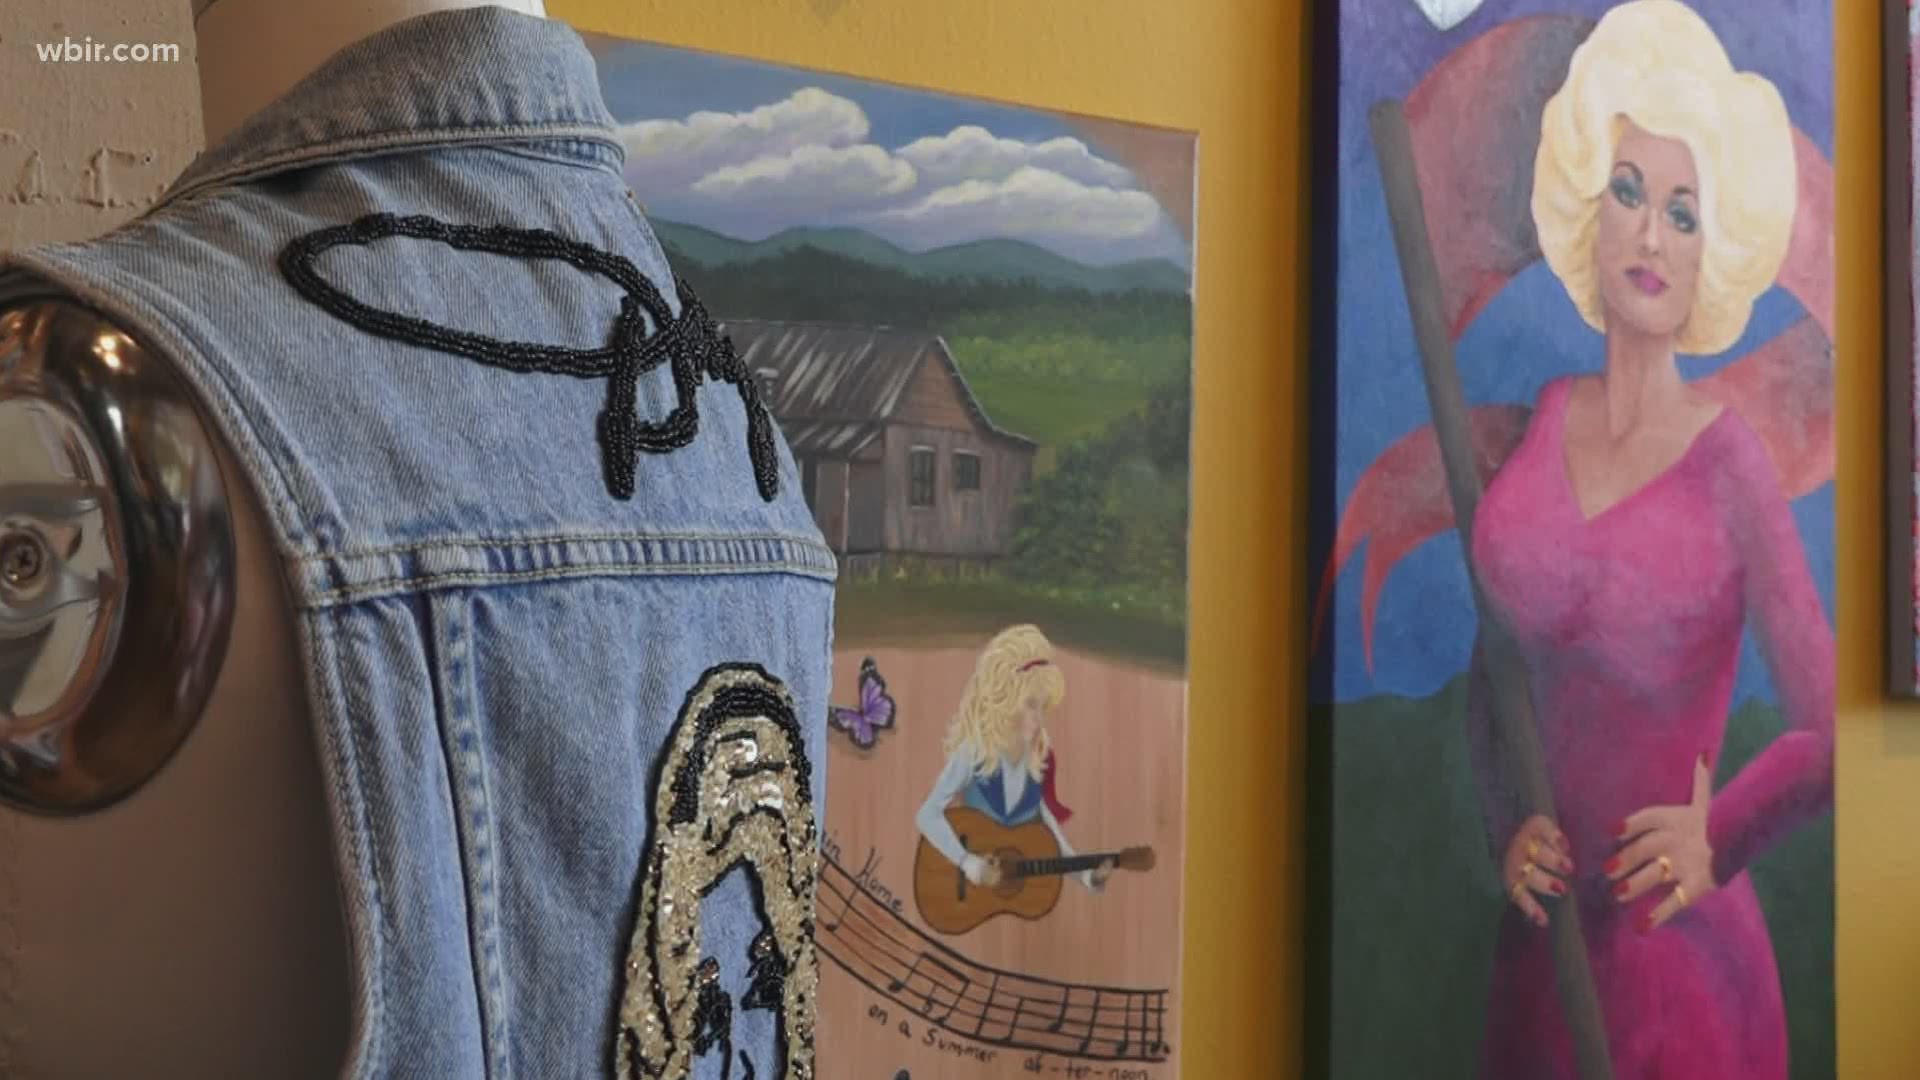 Artists from around East TN are each giving their own creative take on the legendary Dolly Parton in an art competition at Rala in the Old City. June 3, 2020-4pm.